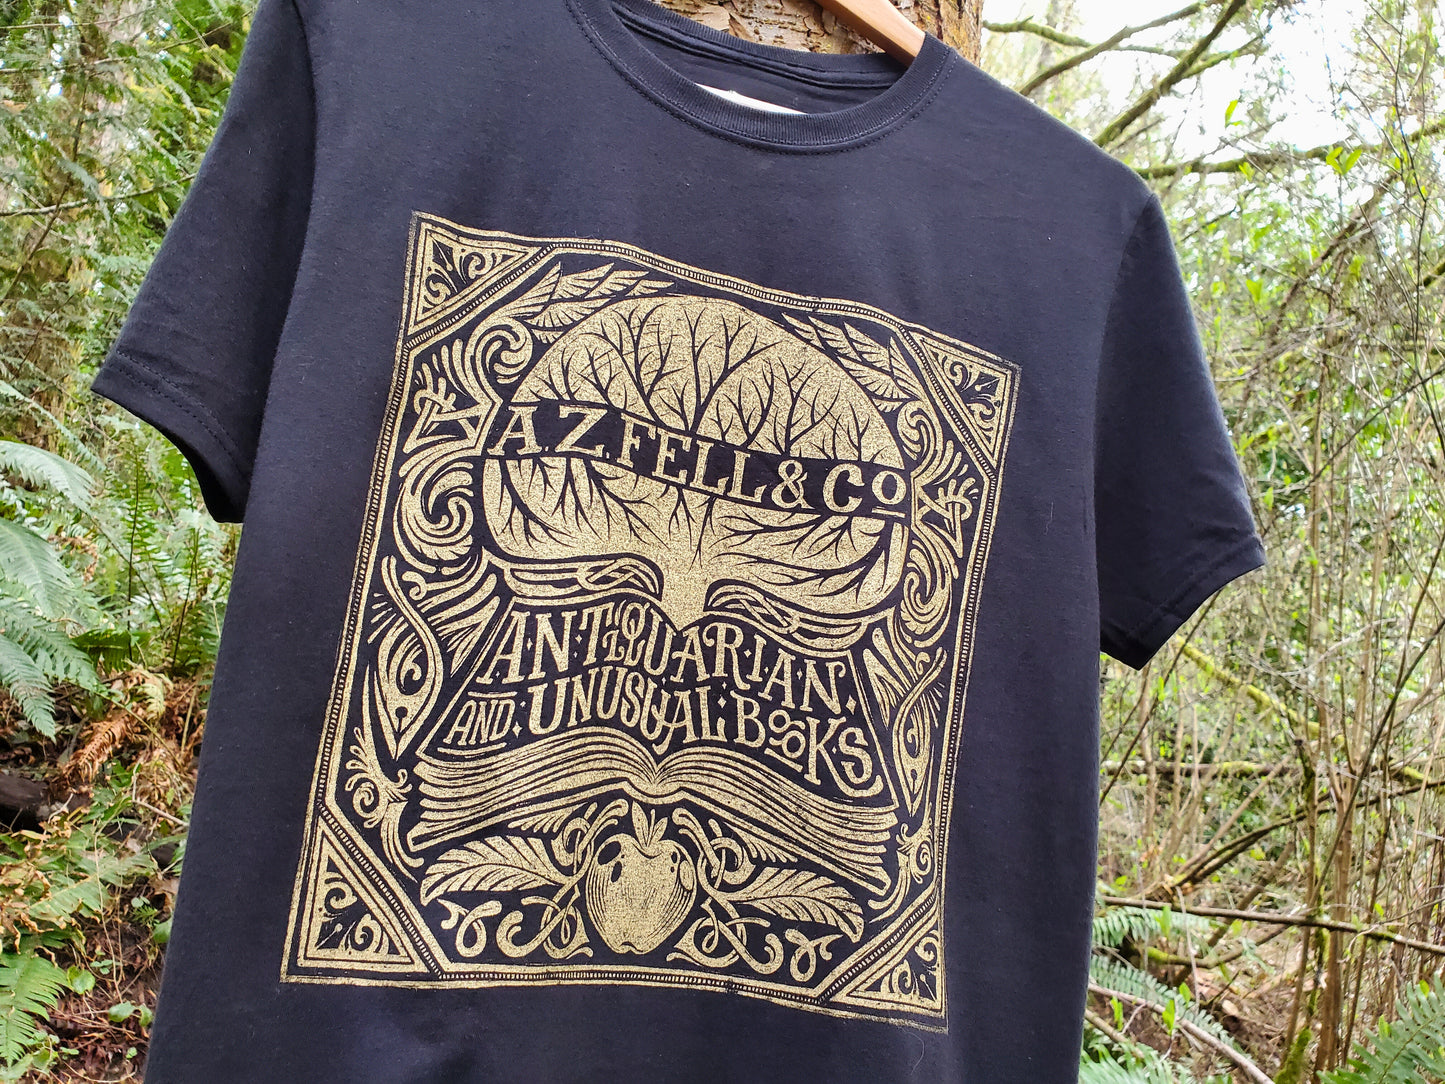 A.Z. FELL & CO Antiquities and Unusual Books Shirt - Black